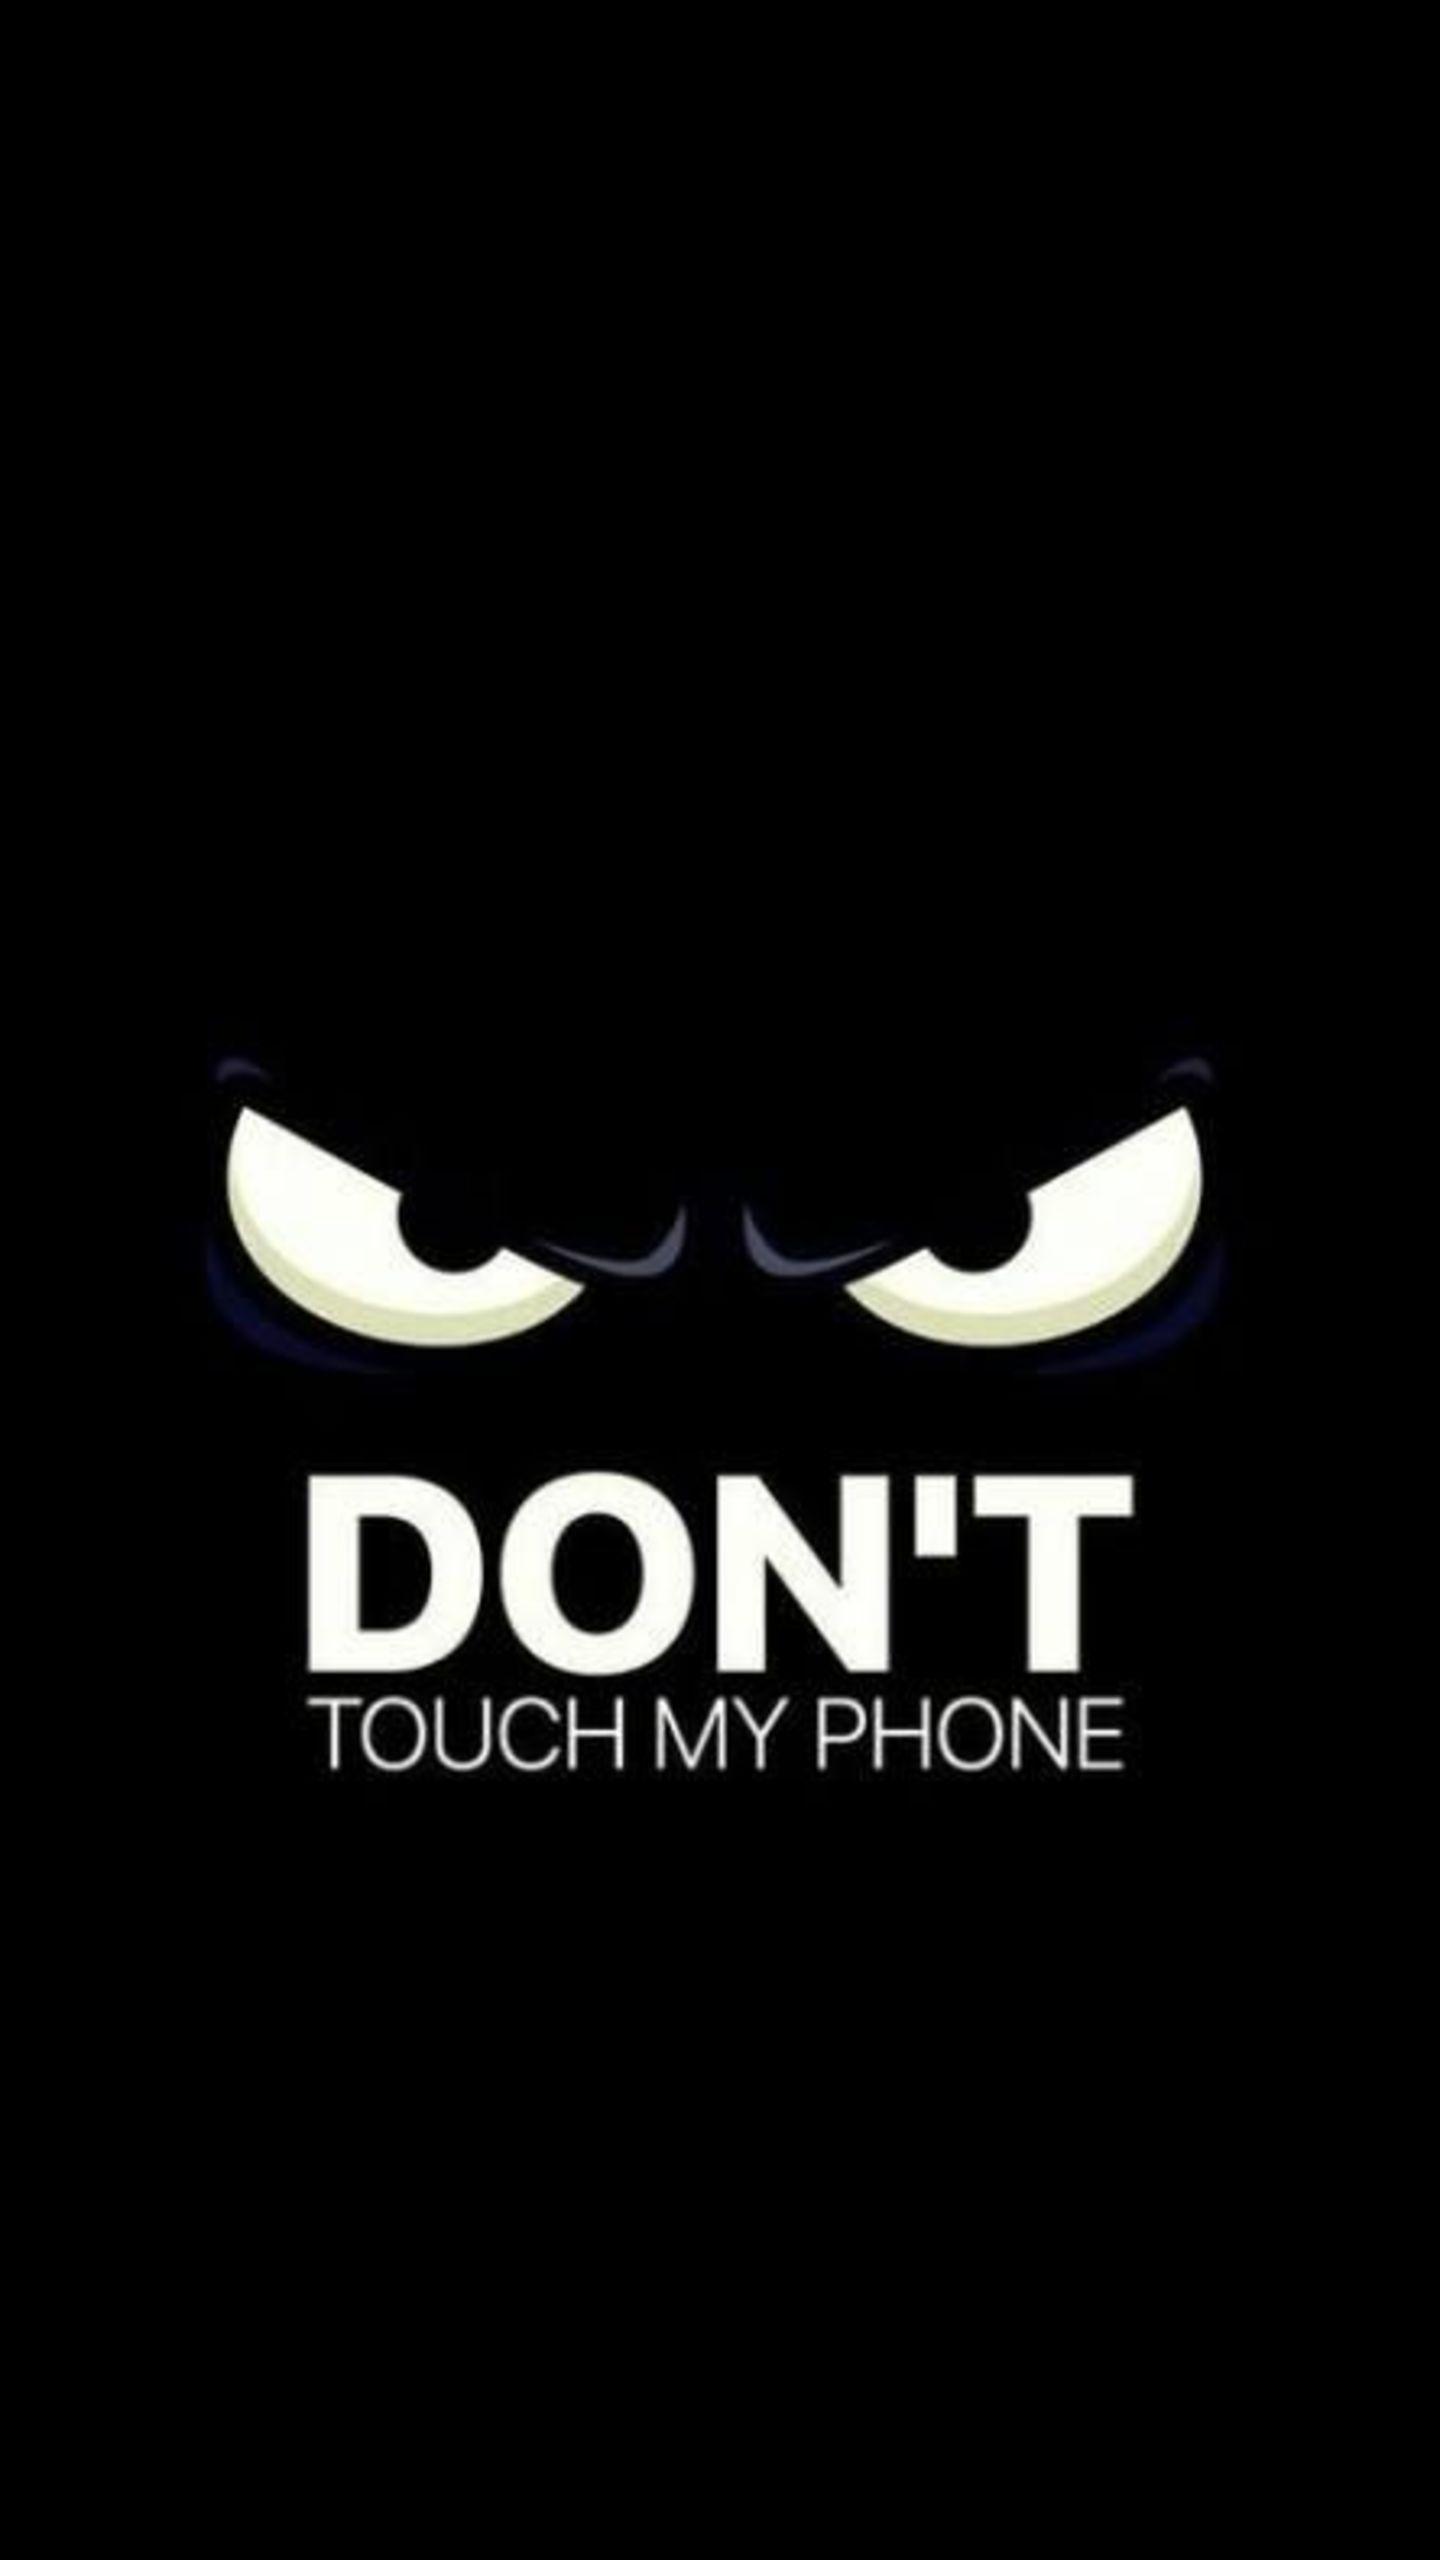 Funny Lock Screen Wallpapers for Android - APK Download